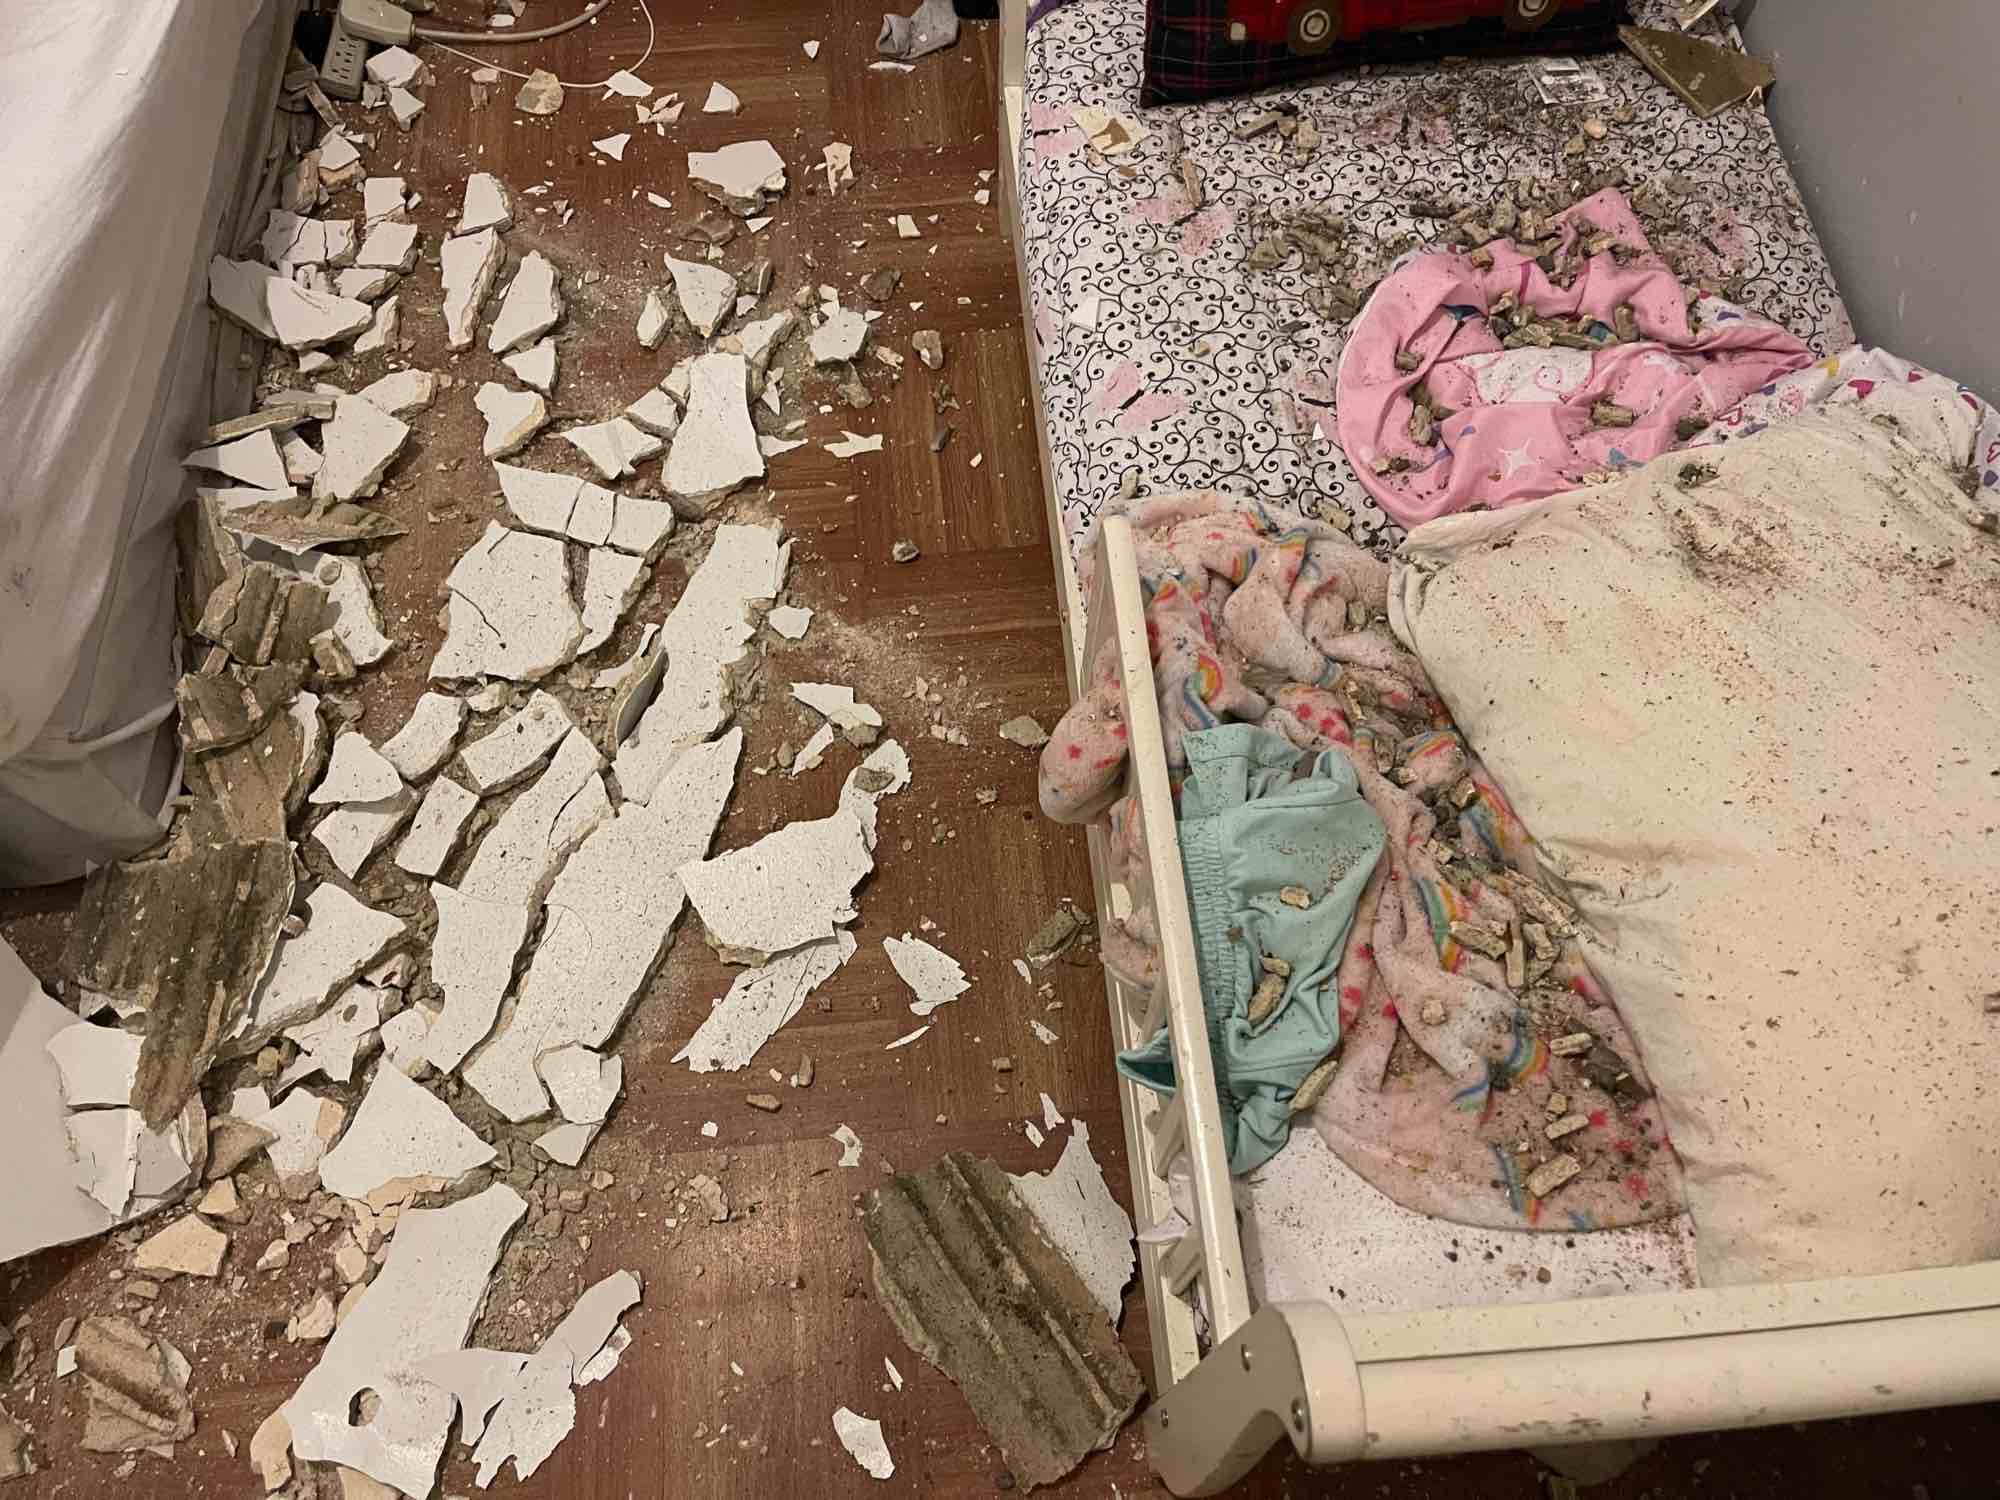 Plaster chunks atop a child's bed at 709 West 170th Street (courtesy of 709 West 170th Street Tenants Association)